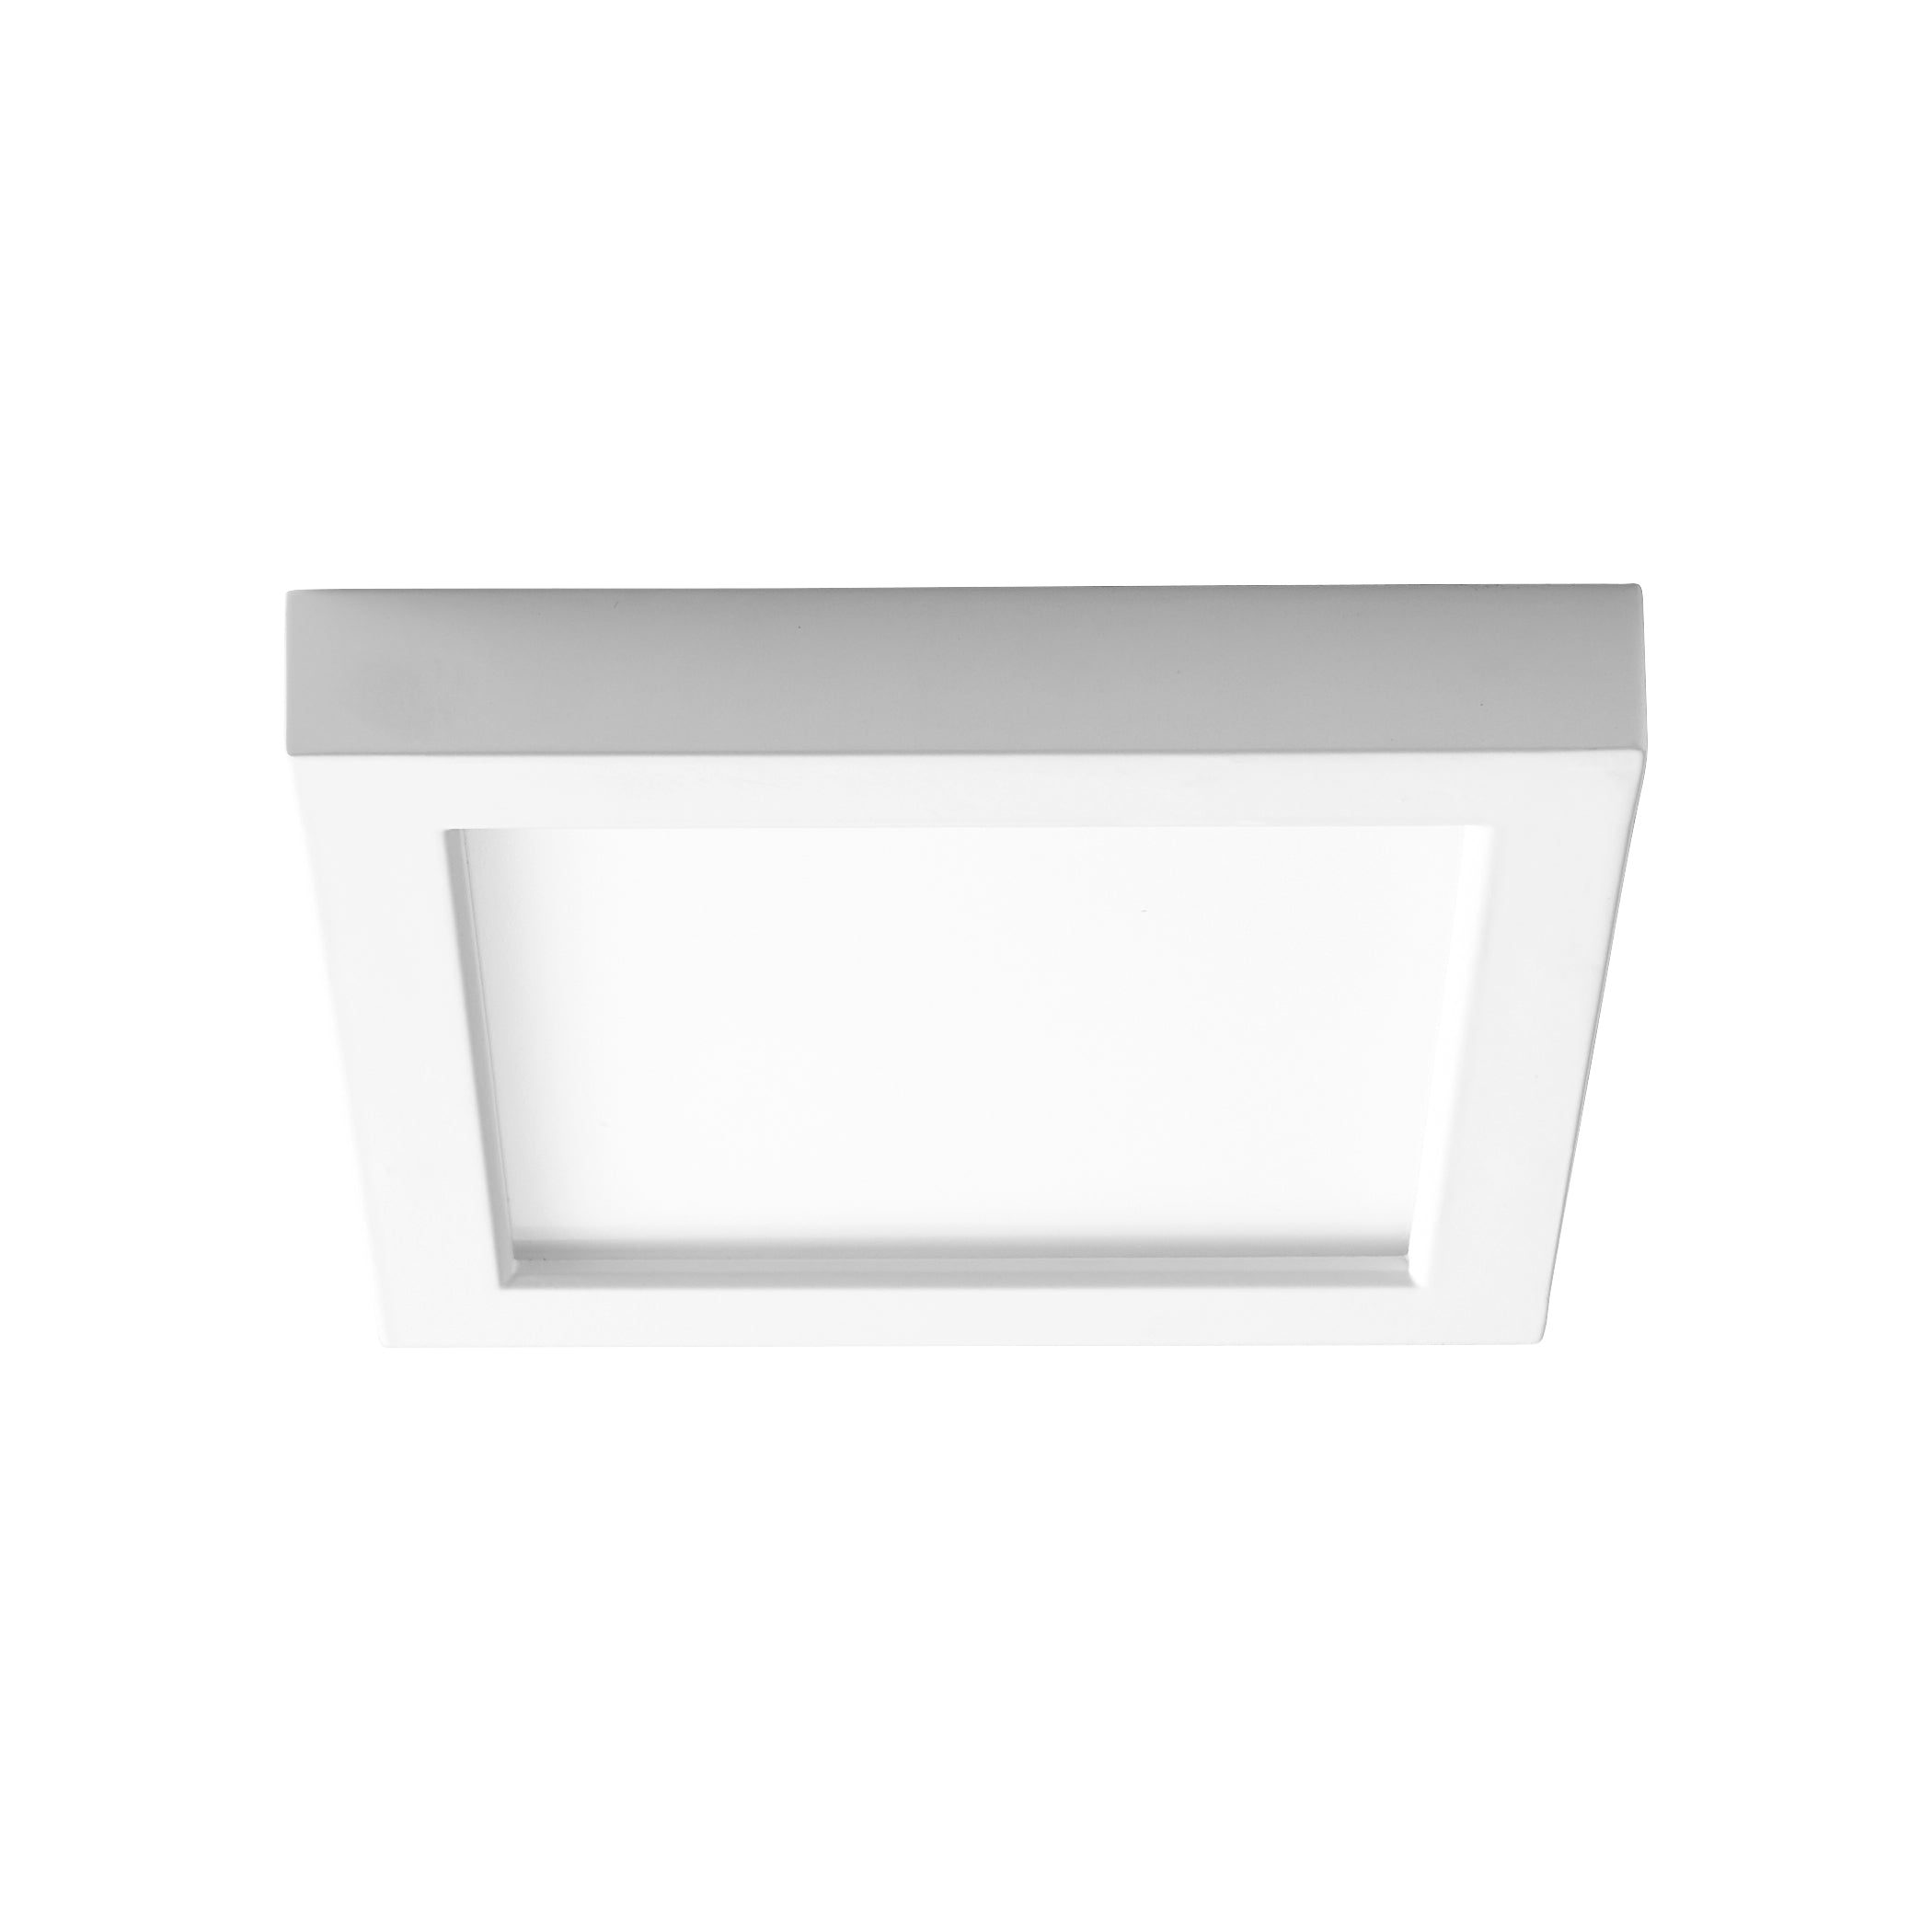 Oxygen Altair 3-333-6 Ceiling Mounts - White